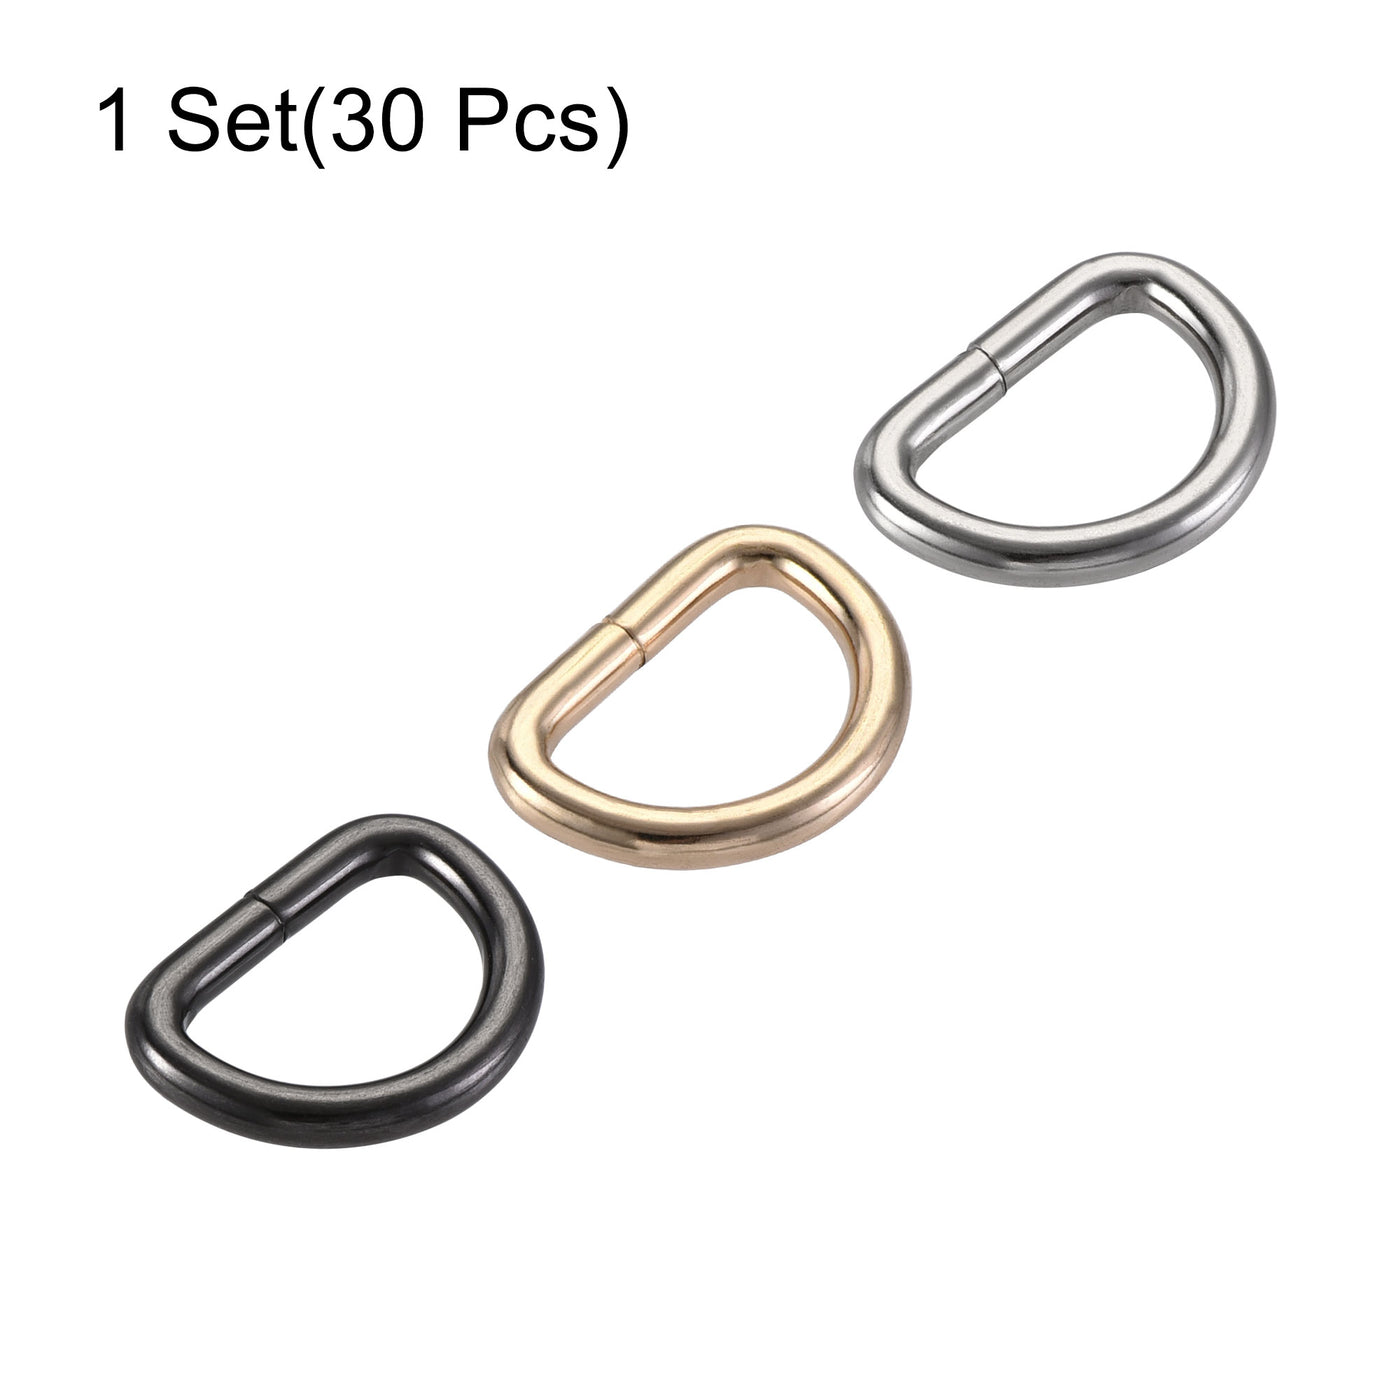 uxcell Uxcell Metal D Ring 0.79"(20mm) D-Rings Buckle Gold Tone, Silver Tone, Black(Total 30pcs)